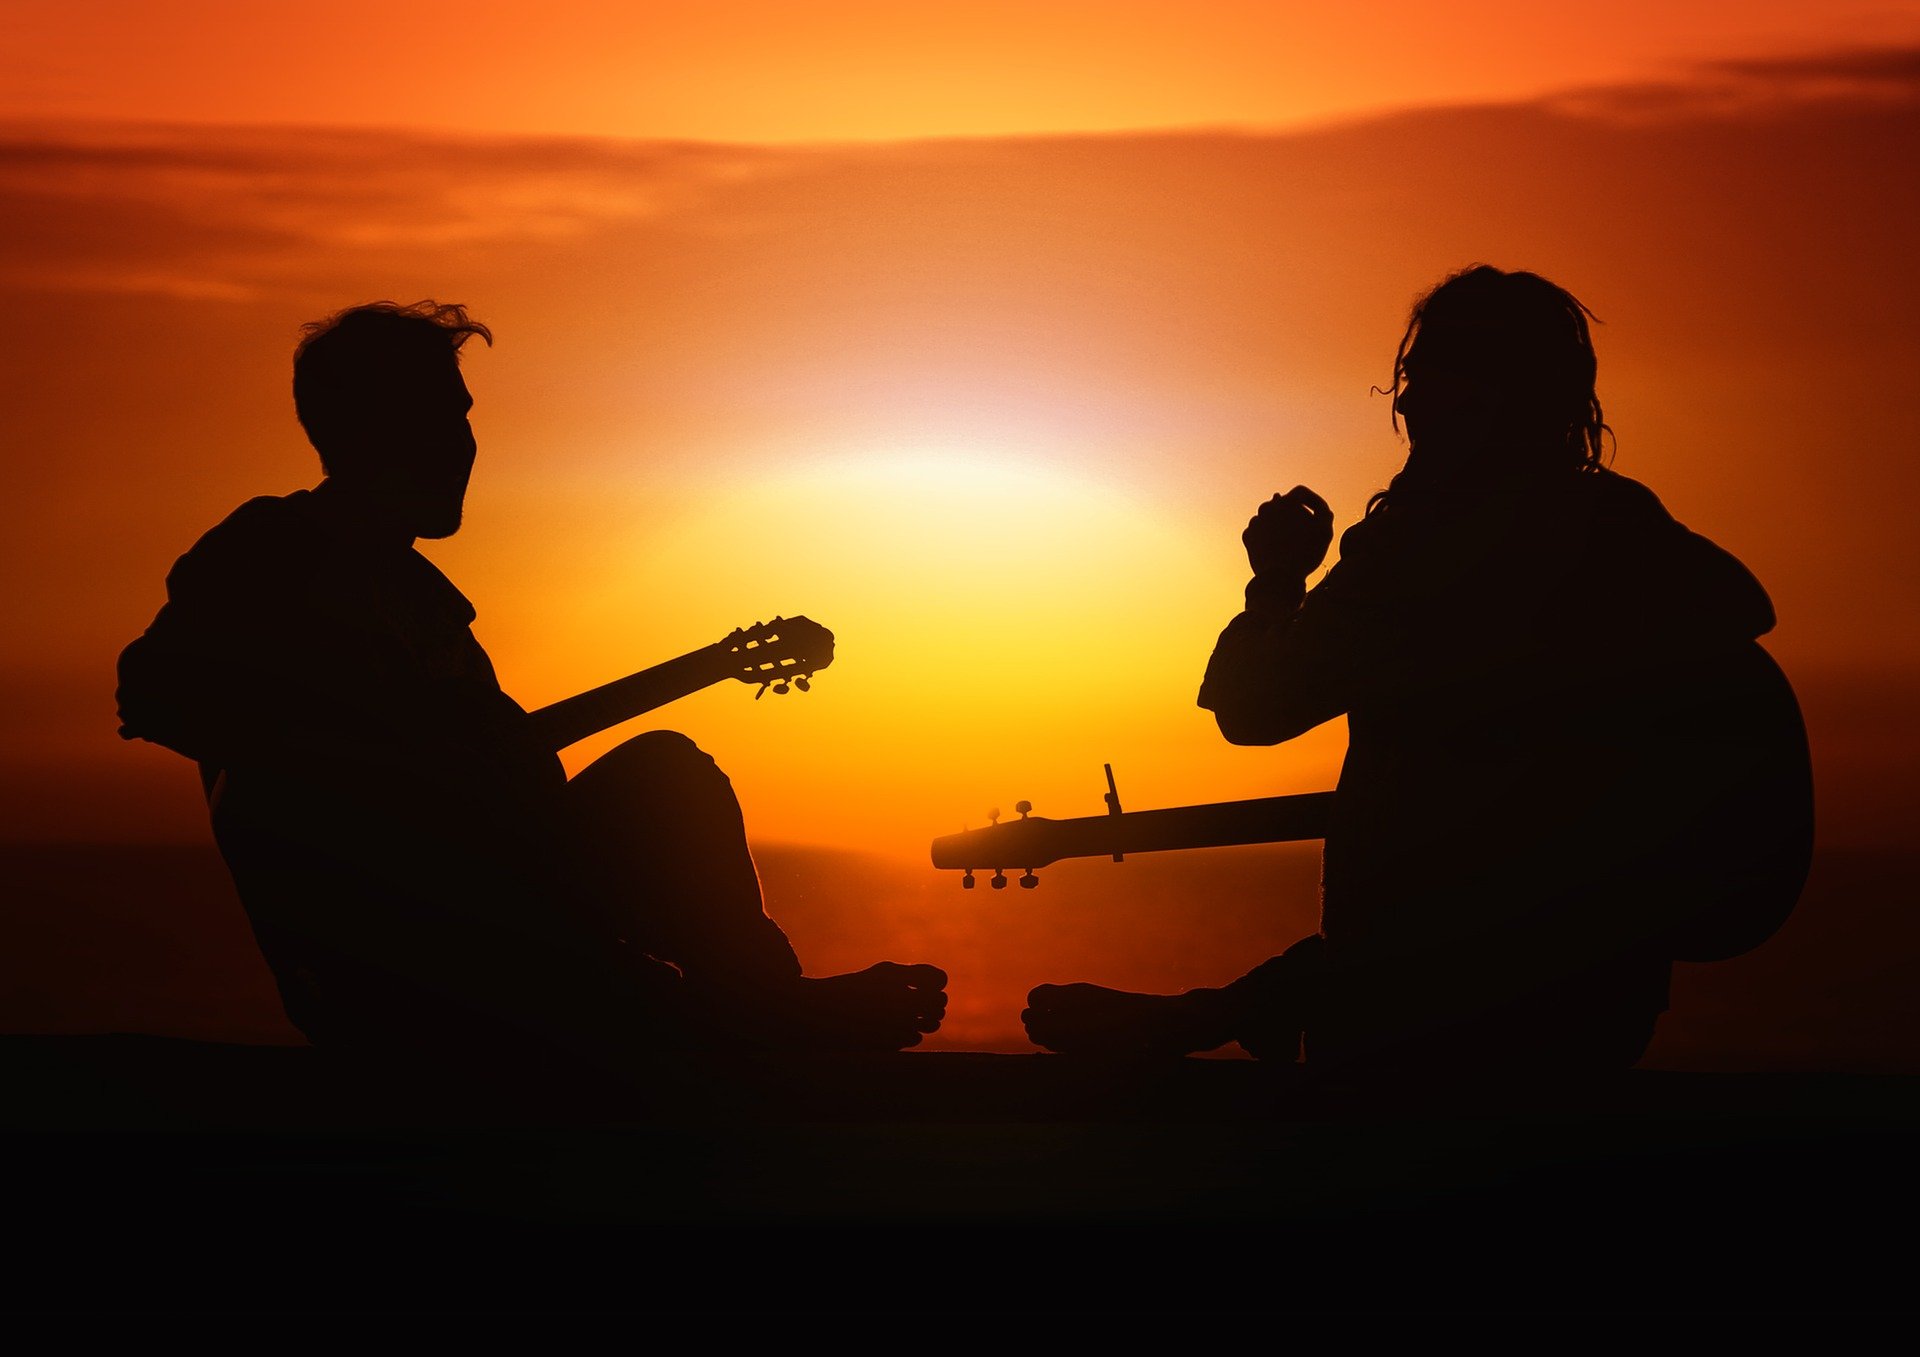 How music helps resolve our deepest inner conflicts